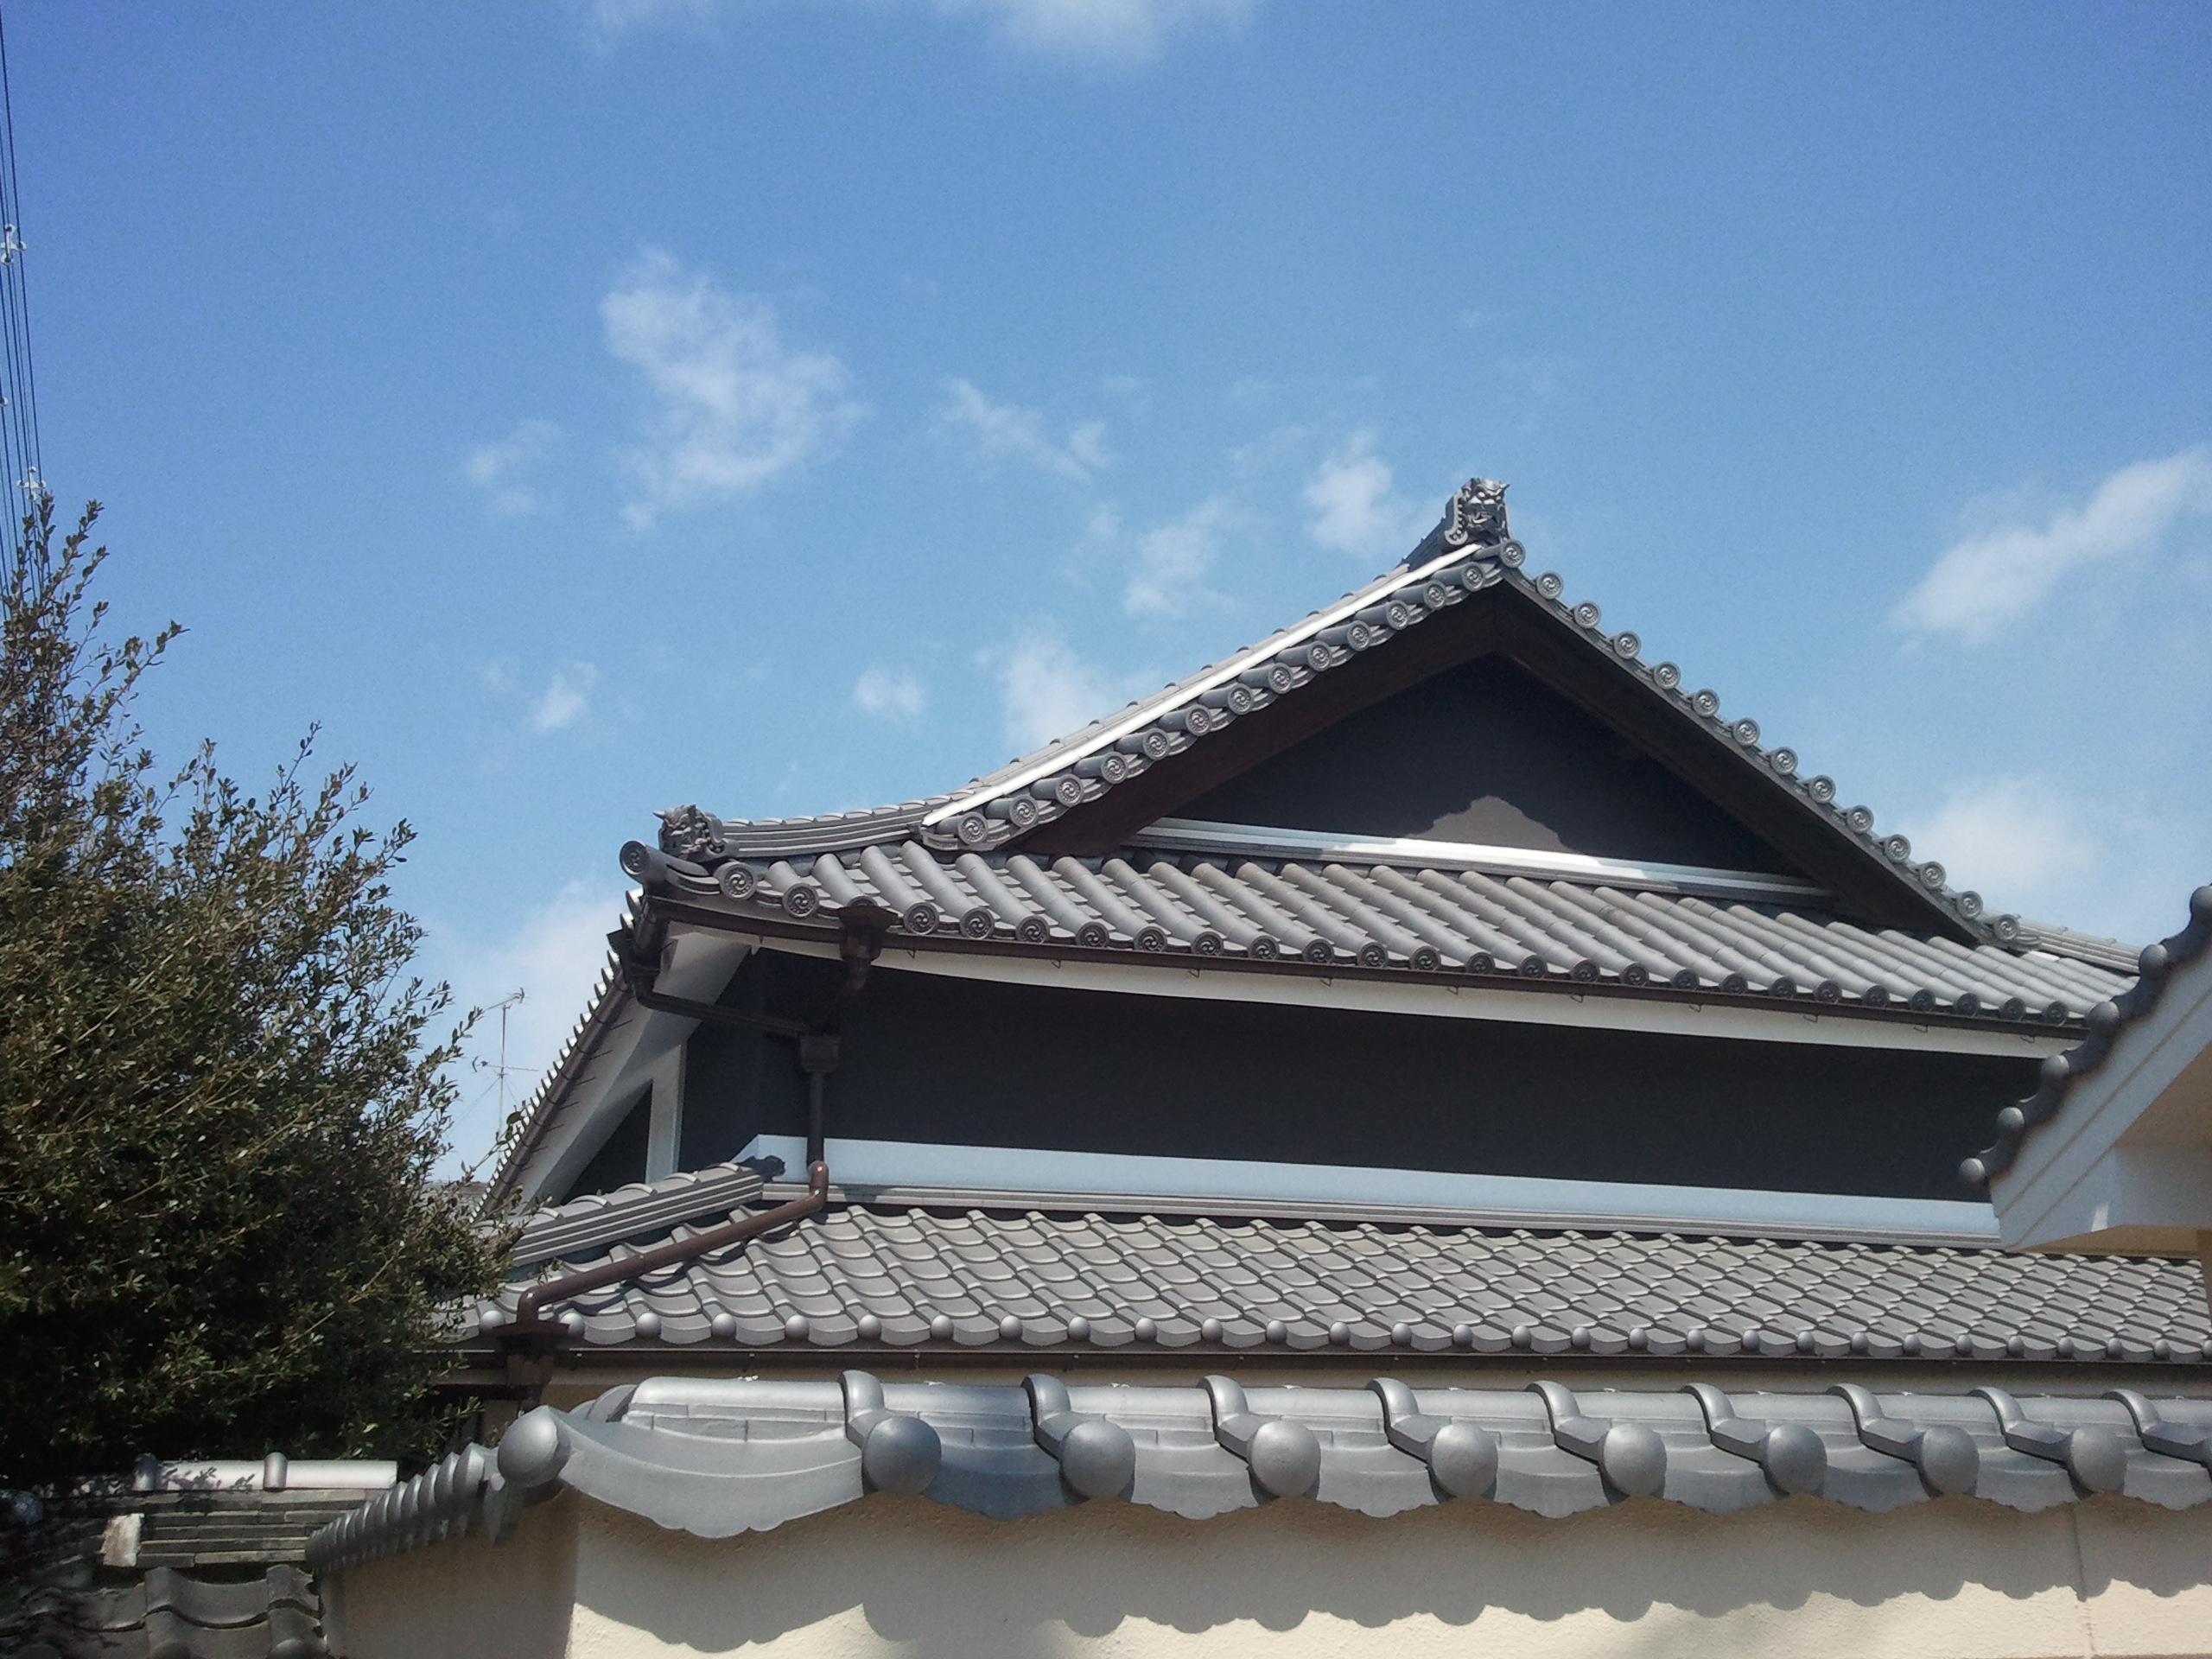 Japanese Houses Awordfromjapan truly Japanese House Roof Design